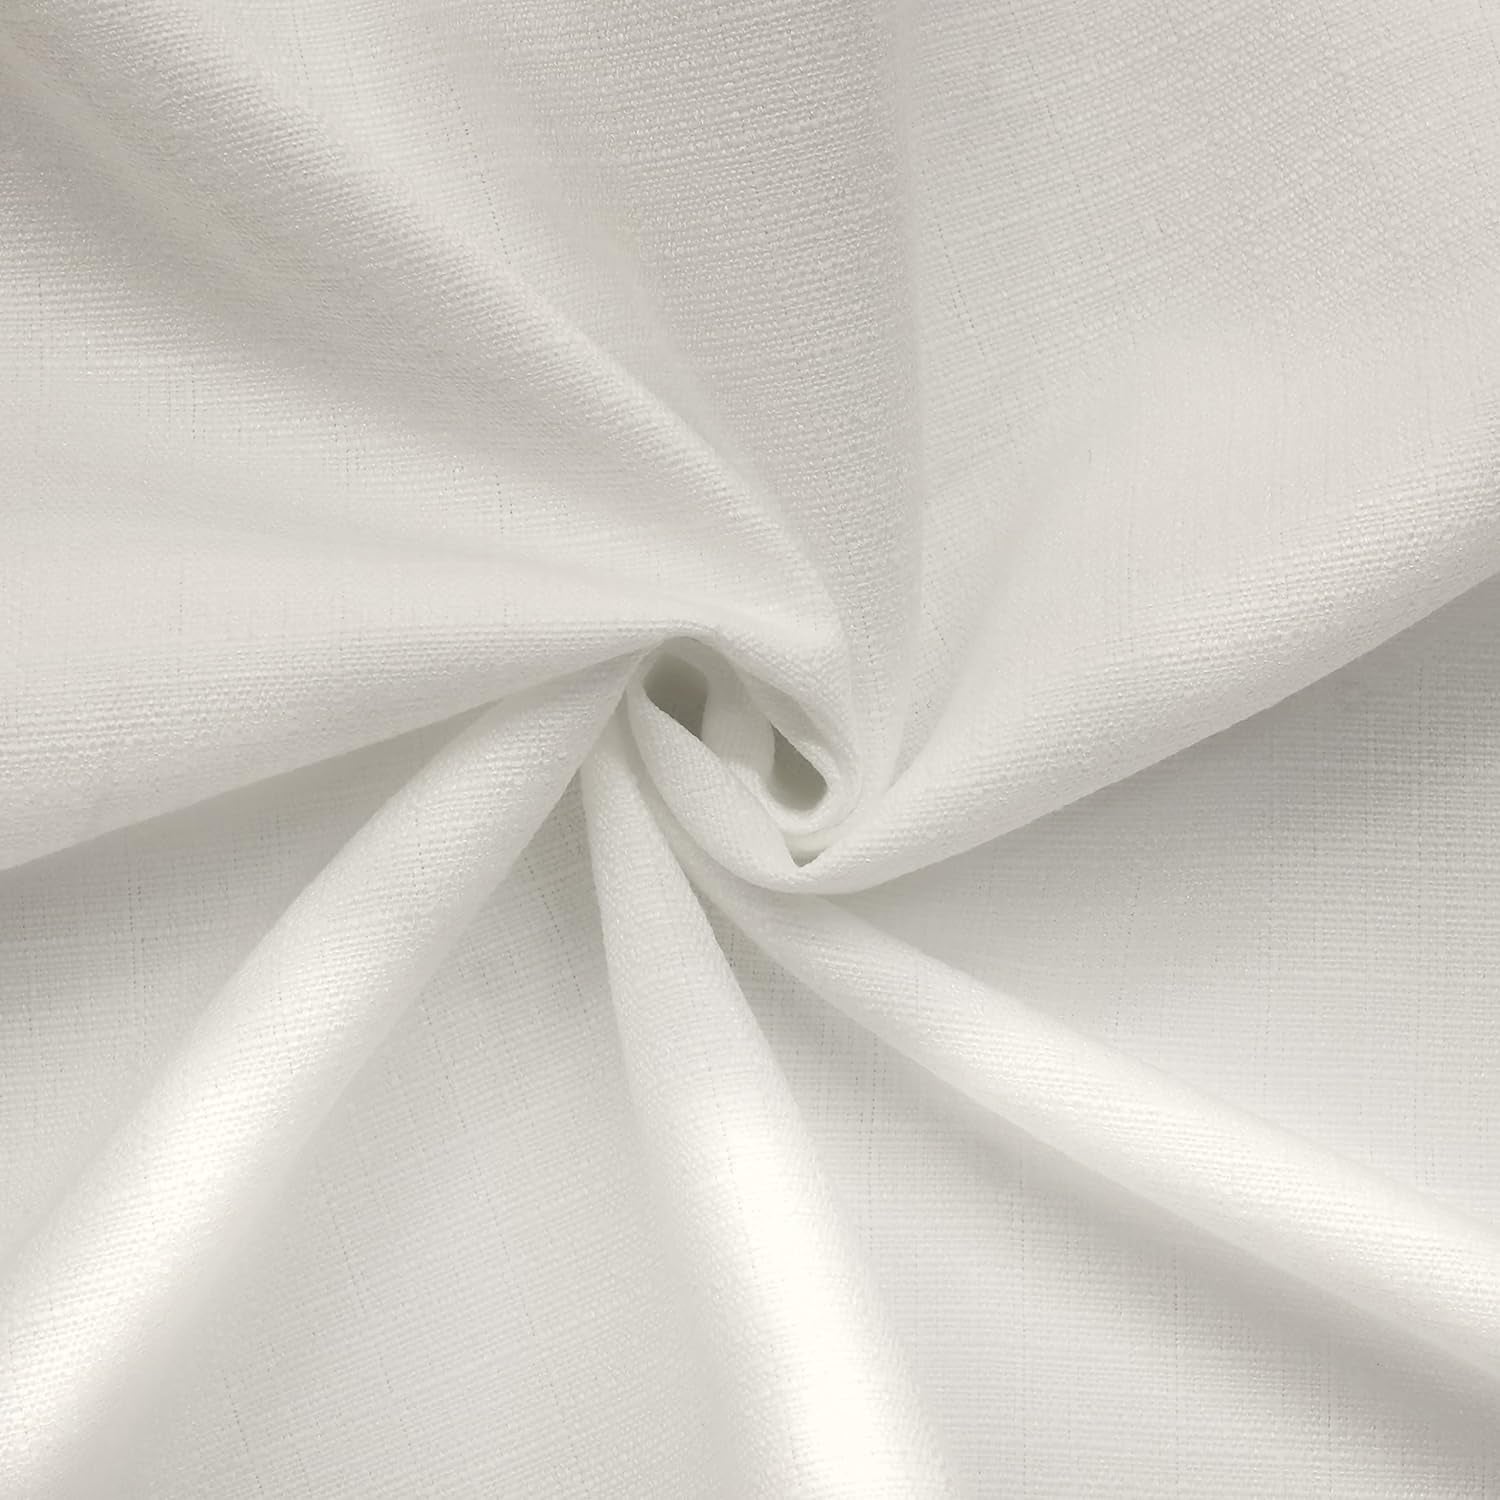 Commonwealth Home Fashions Mulberry Back Tab Curtain Panel Window Dressing 54 X 84 in White (71996-142-54-84-001)  Commonwealth Home Fashions   